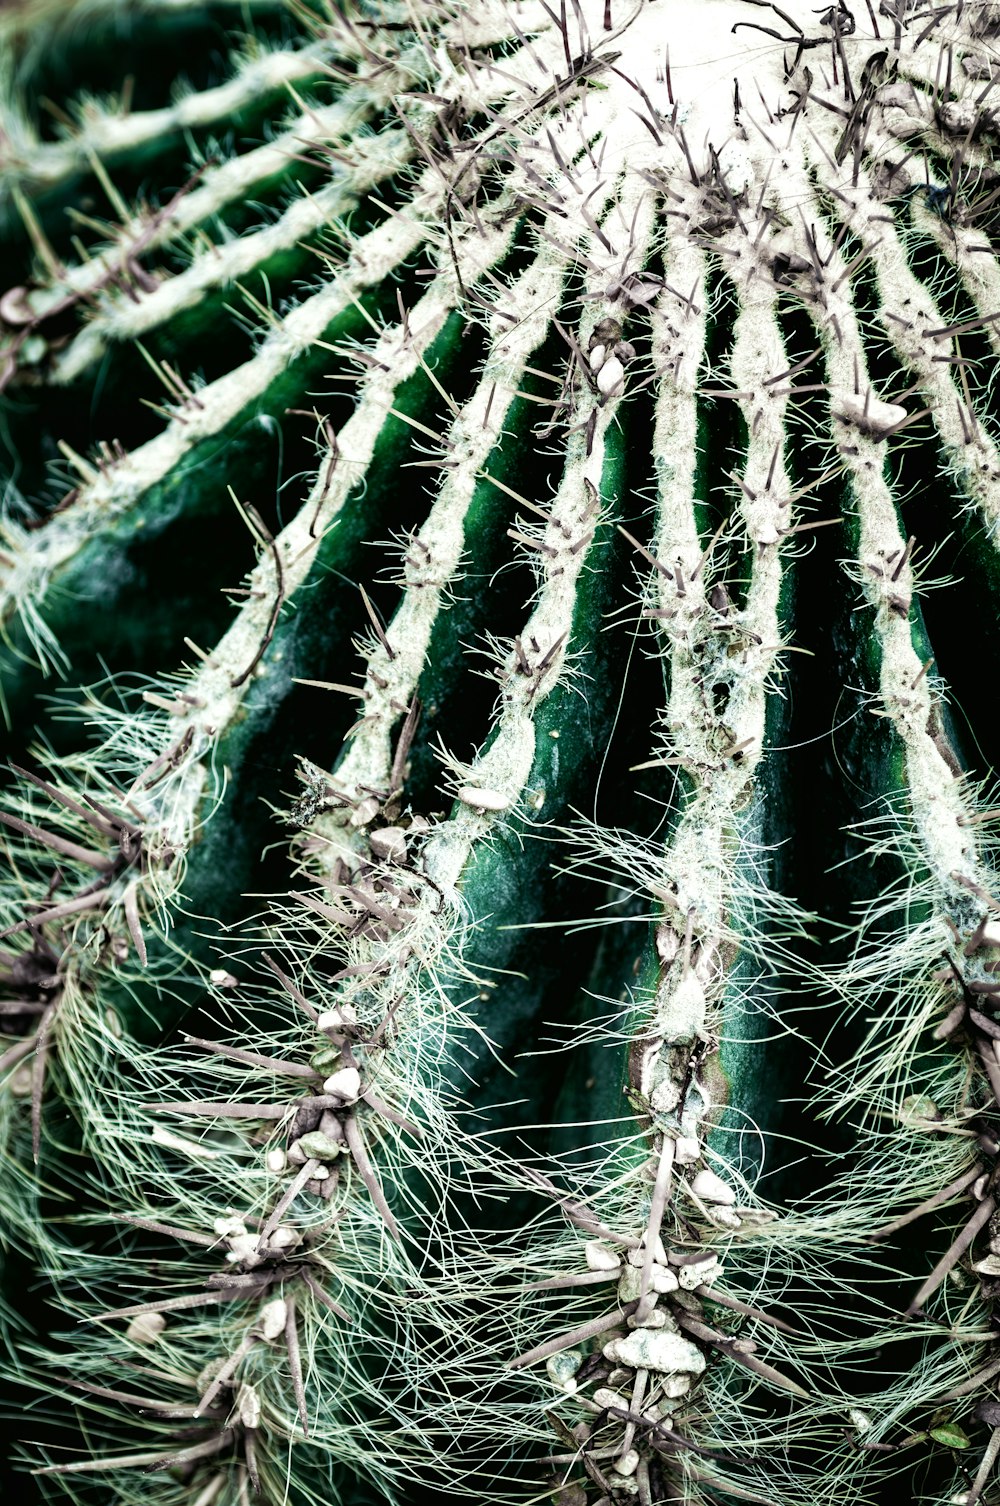 a close up view of a cactus's spines